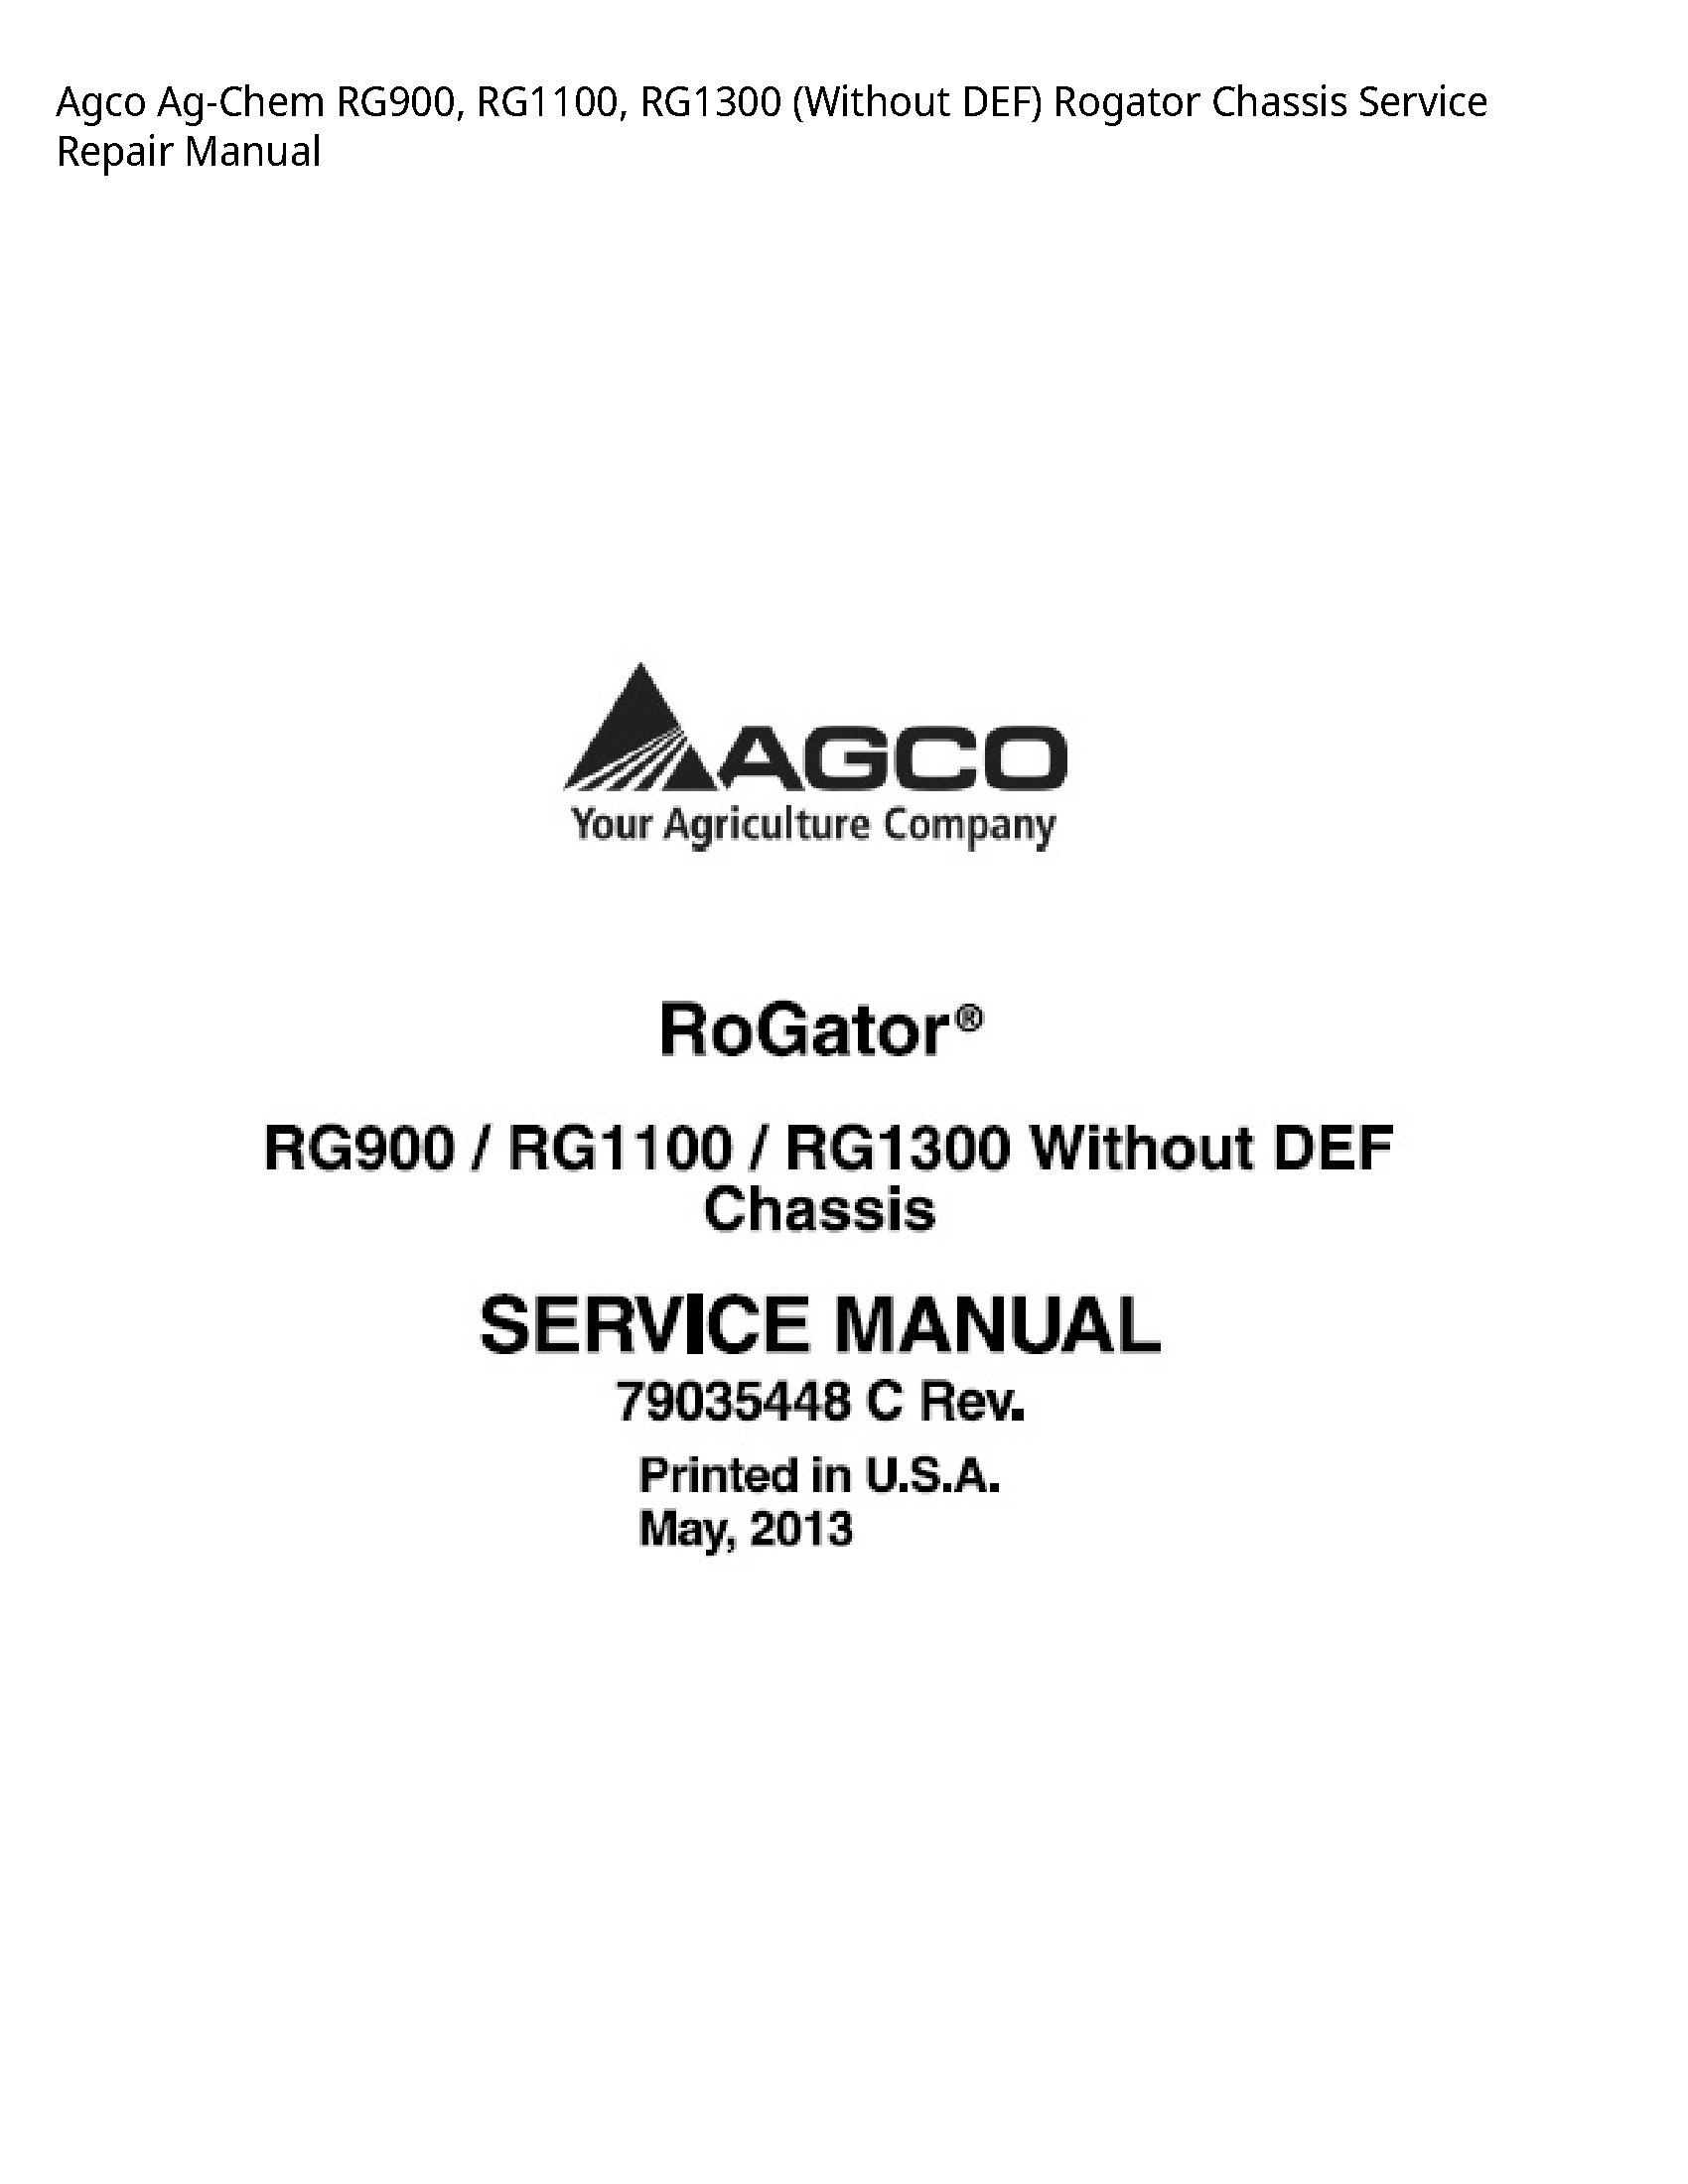 AGCO RG900 Ag-Chem (Without DEF) Rogator Chassis manual